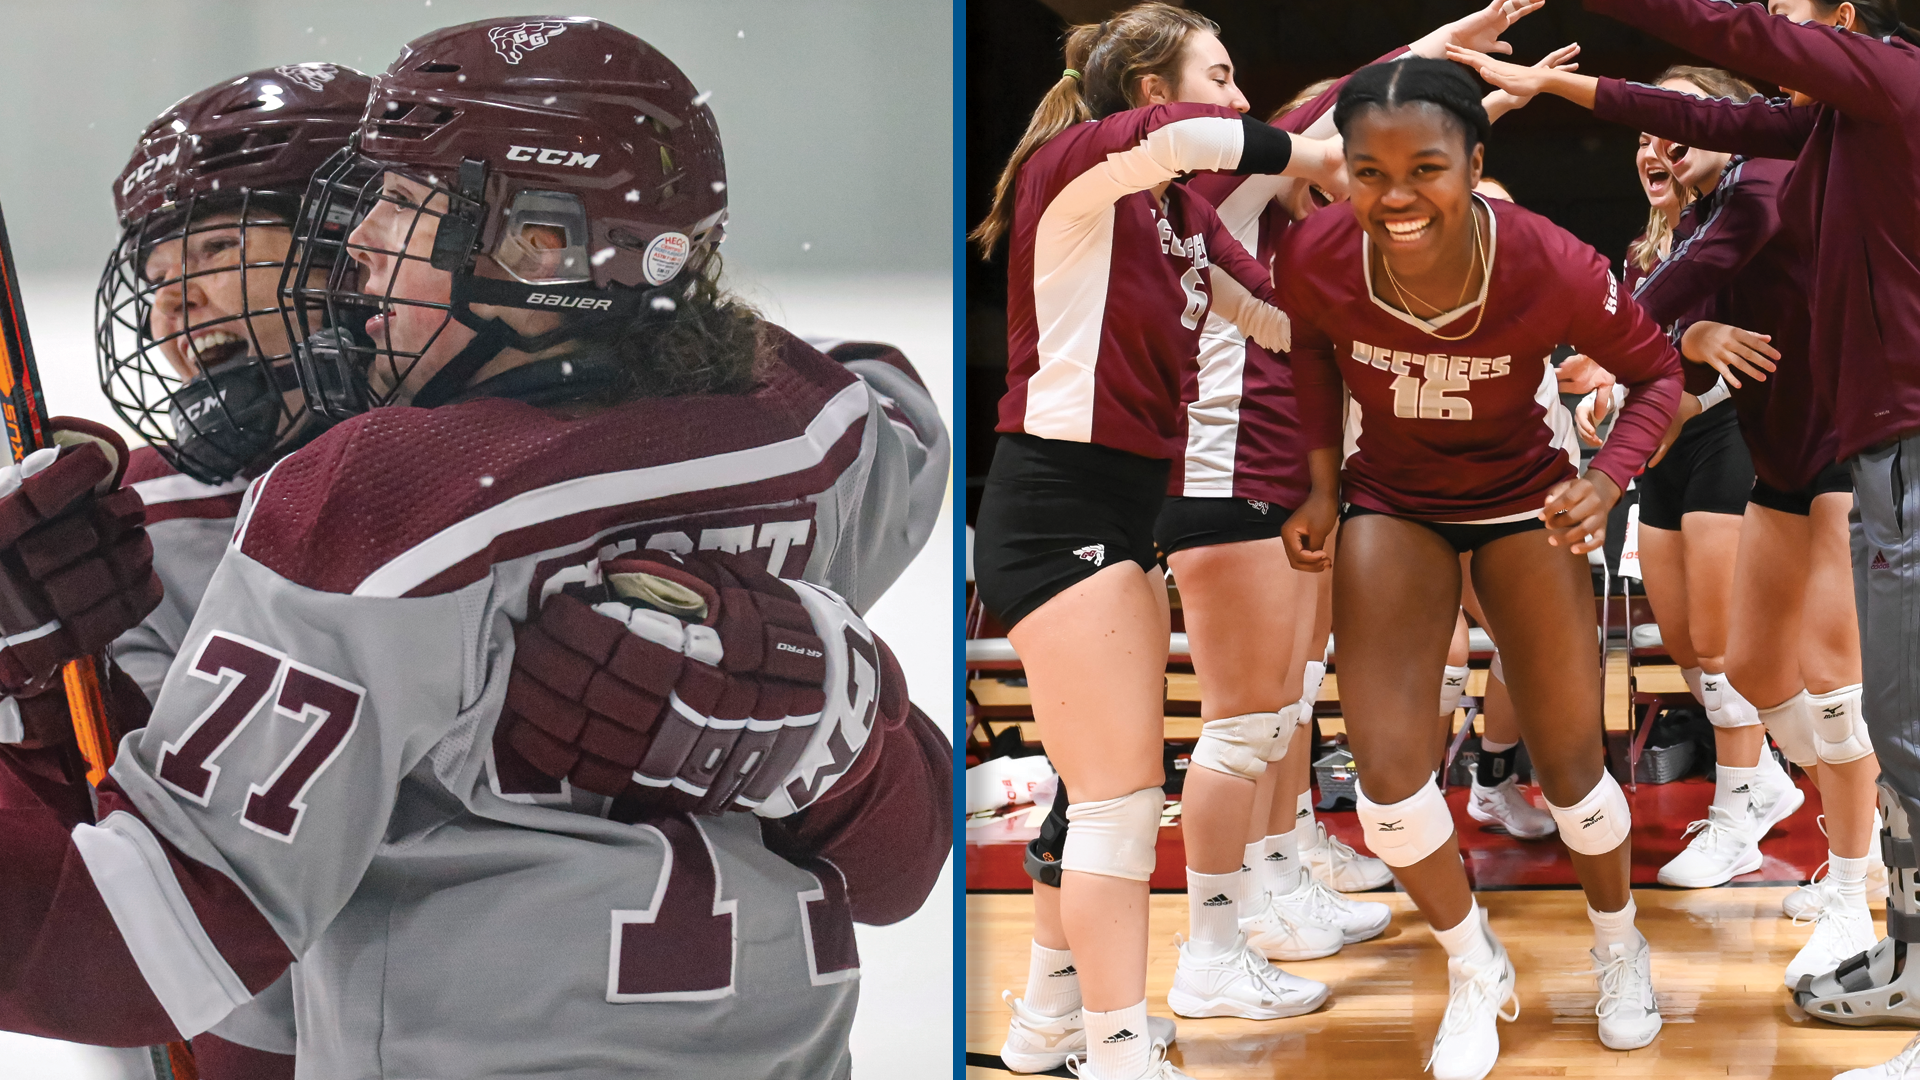 Gee-Gees announce intention to move women's hockey and volleyball to OUA